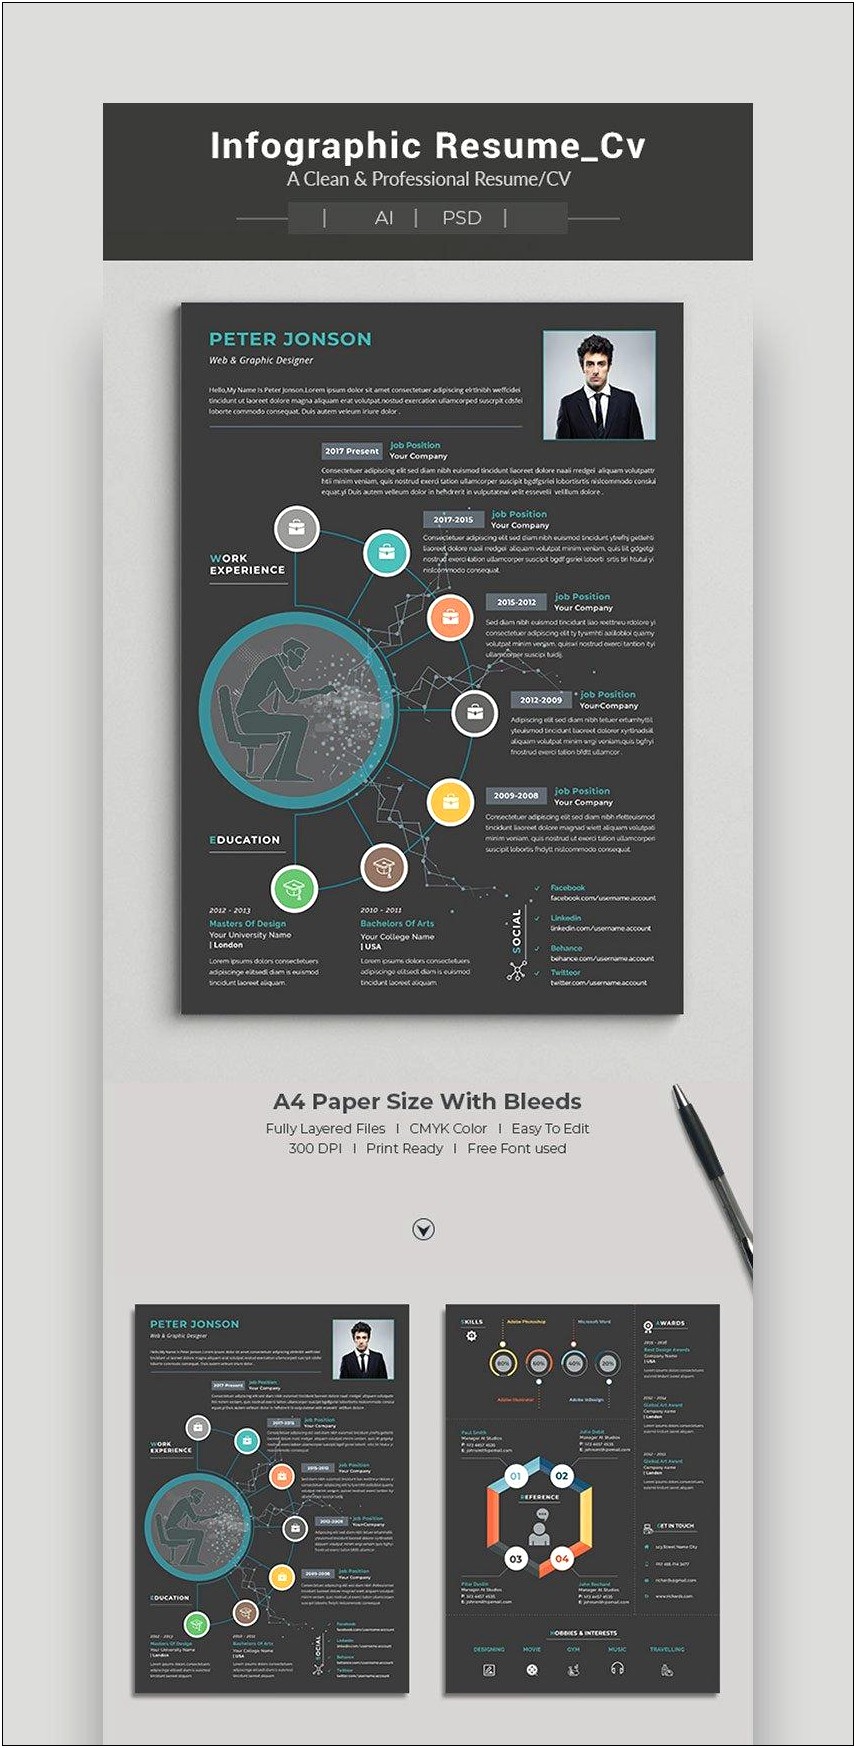 Infographic Examples It Professional Resume